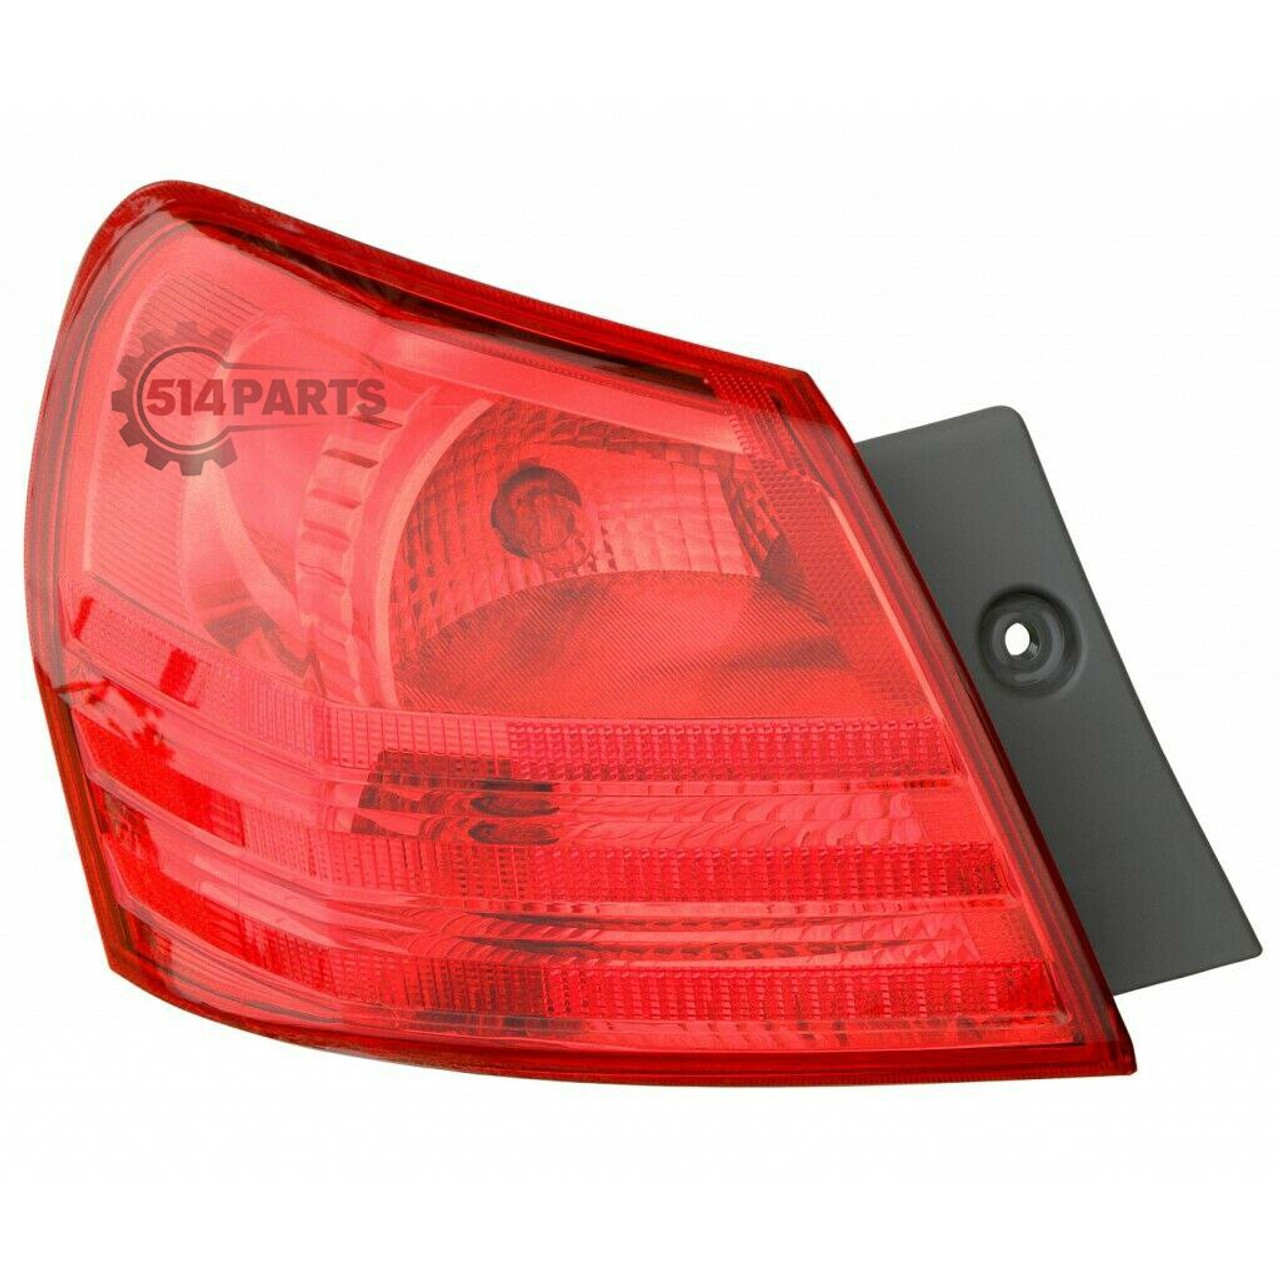 2008 - 2013 NISSAN ROGUE TAIL LIGHTS - PHARES ARRIERE